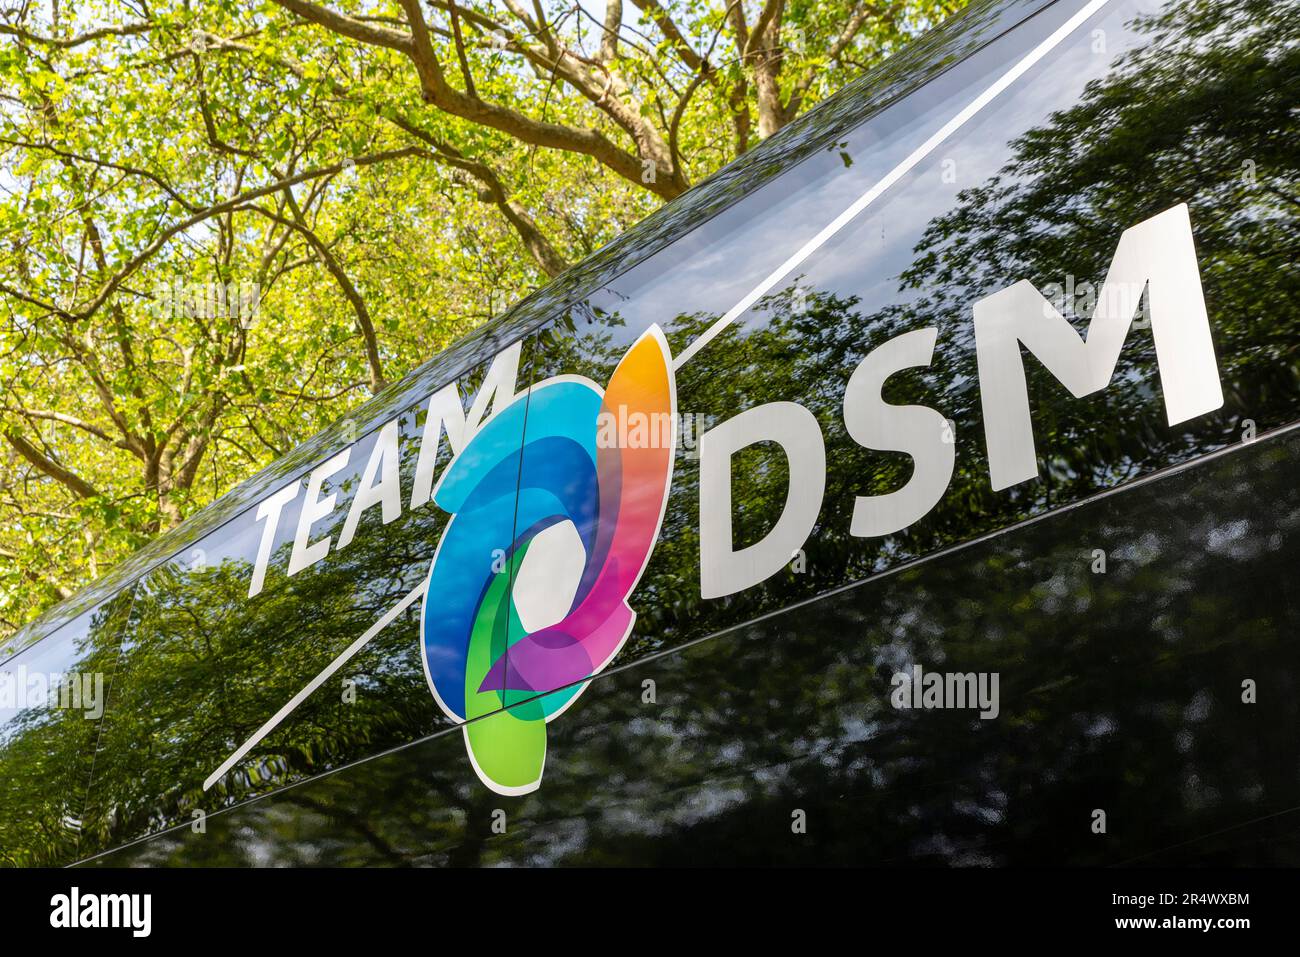 Team DSM team support vehicle for the RideLondon Classique Stage 3 UCI Women's World Tour cycle race around roads in central London, UK. Stock Photo